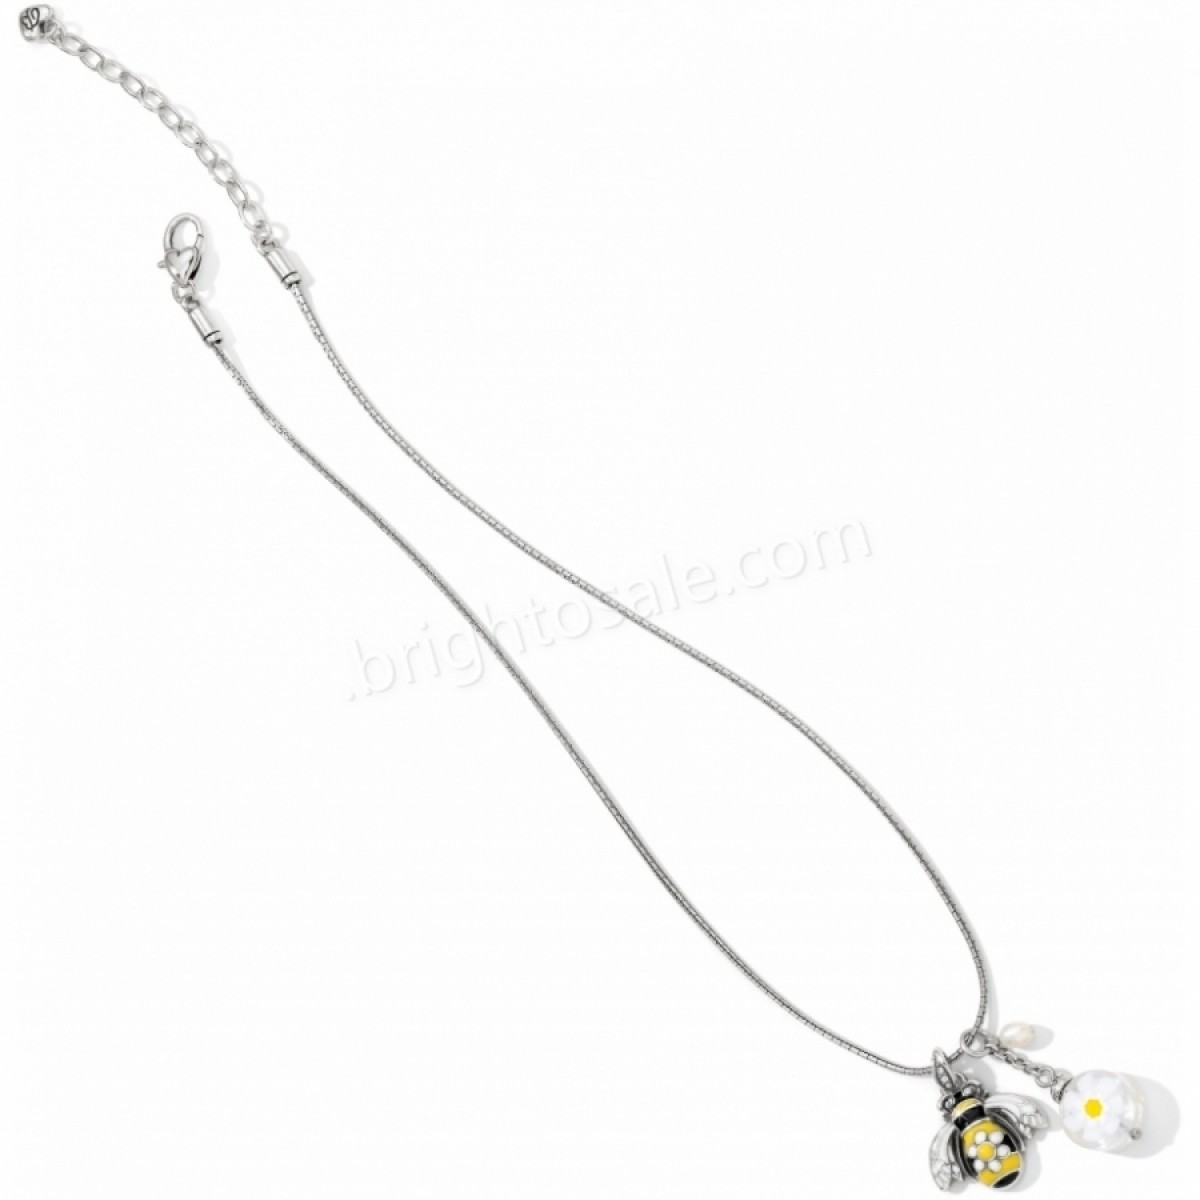 Brighton Collectibles & Online Discount Chara Ellipse Spin Long Necklace - -2